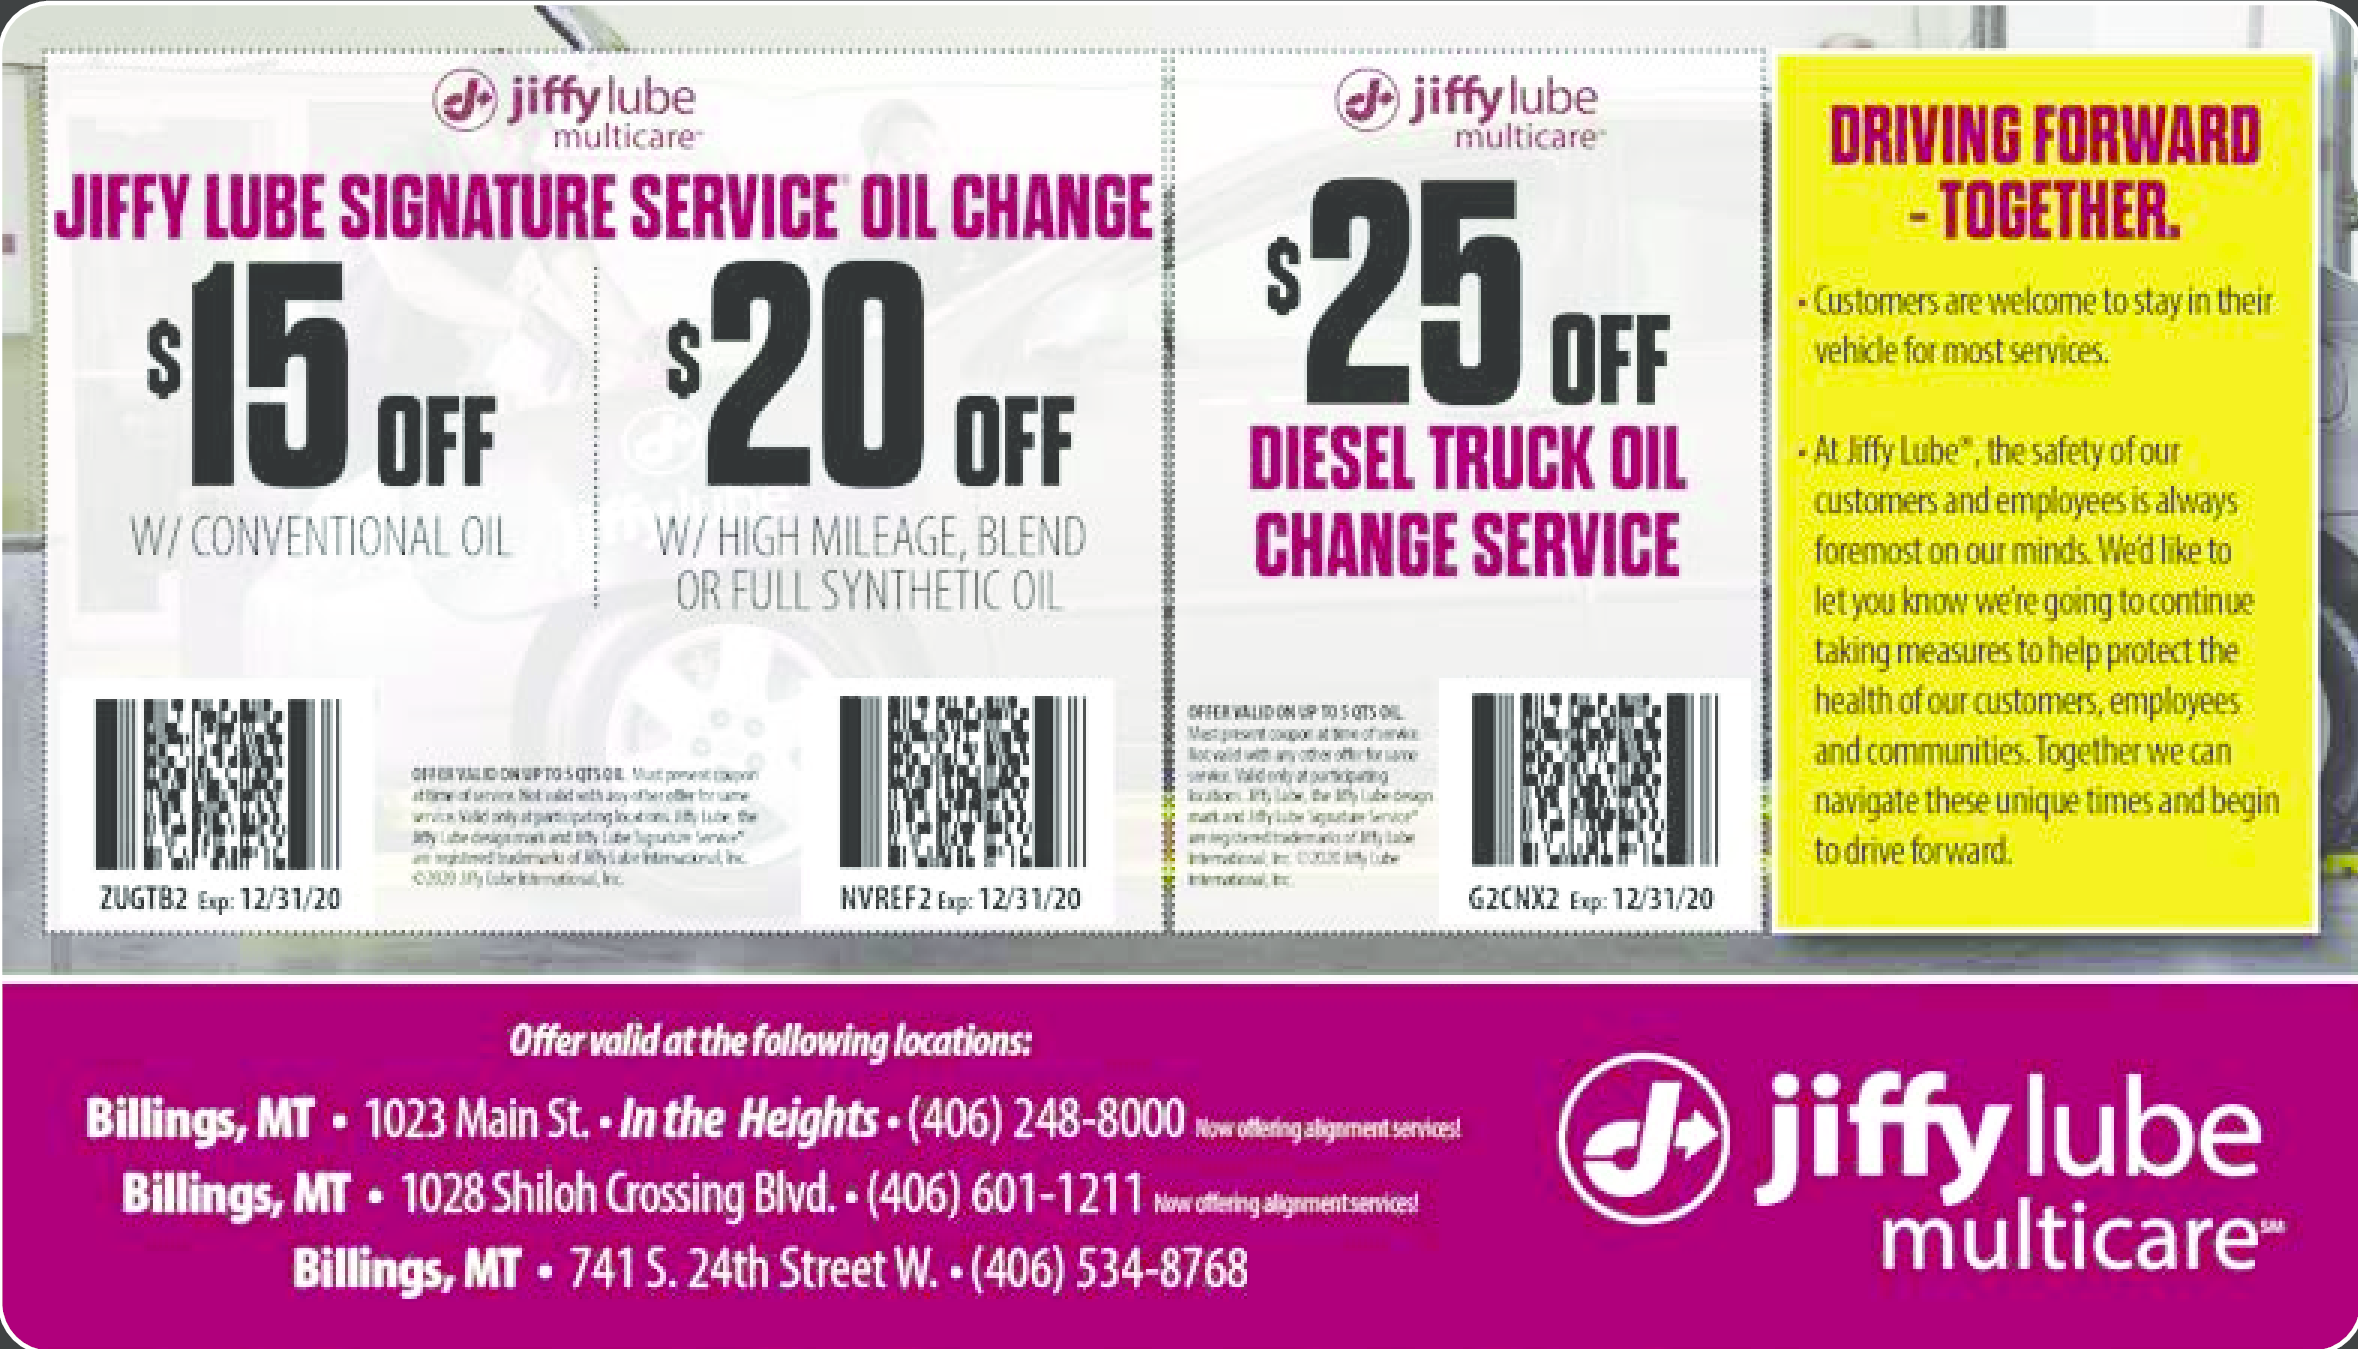 jiffy lube coupon 2018 services